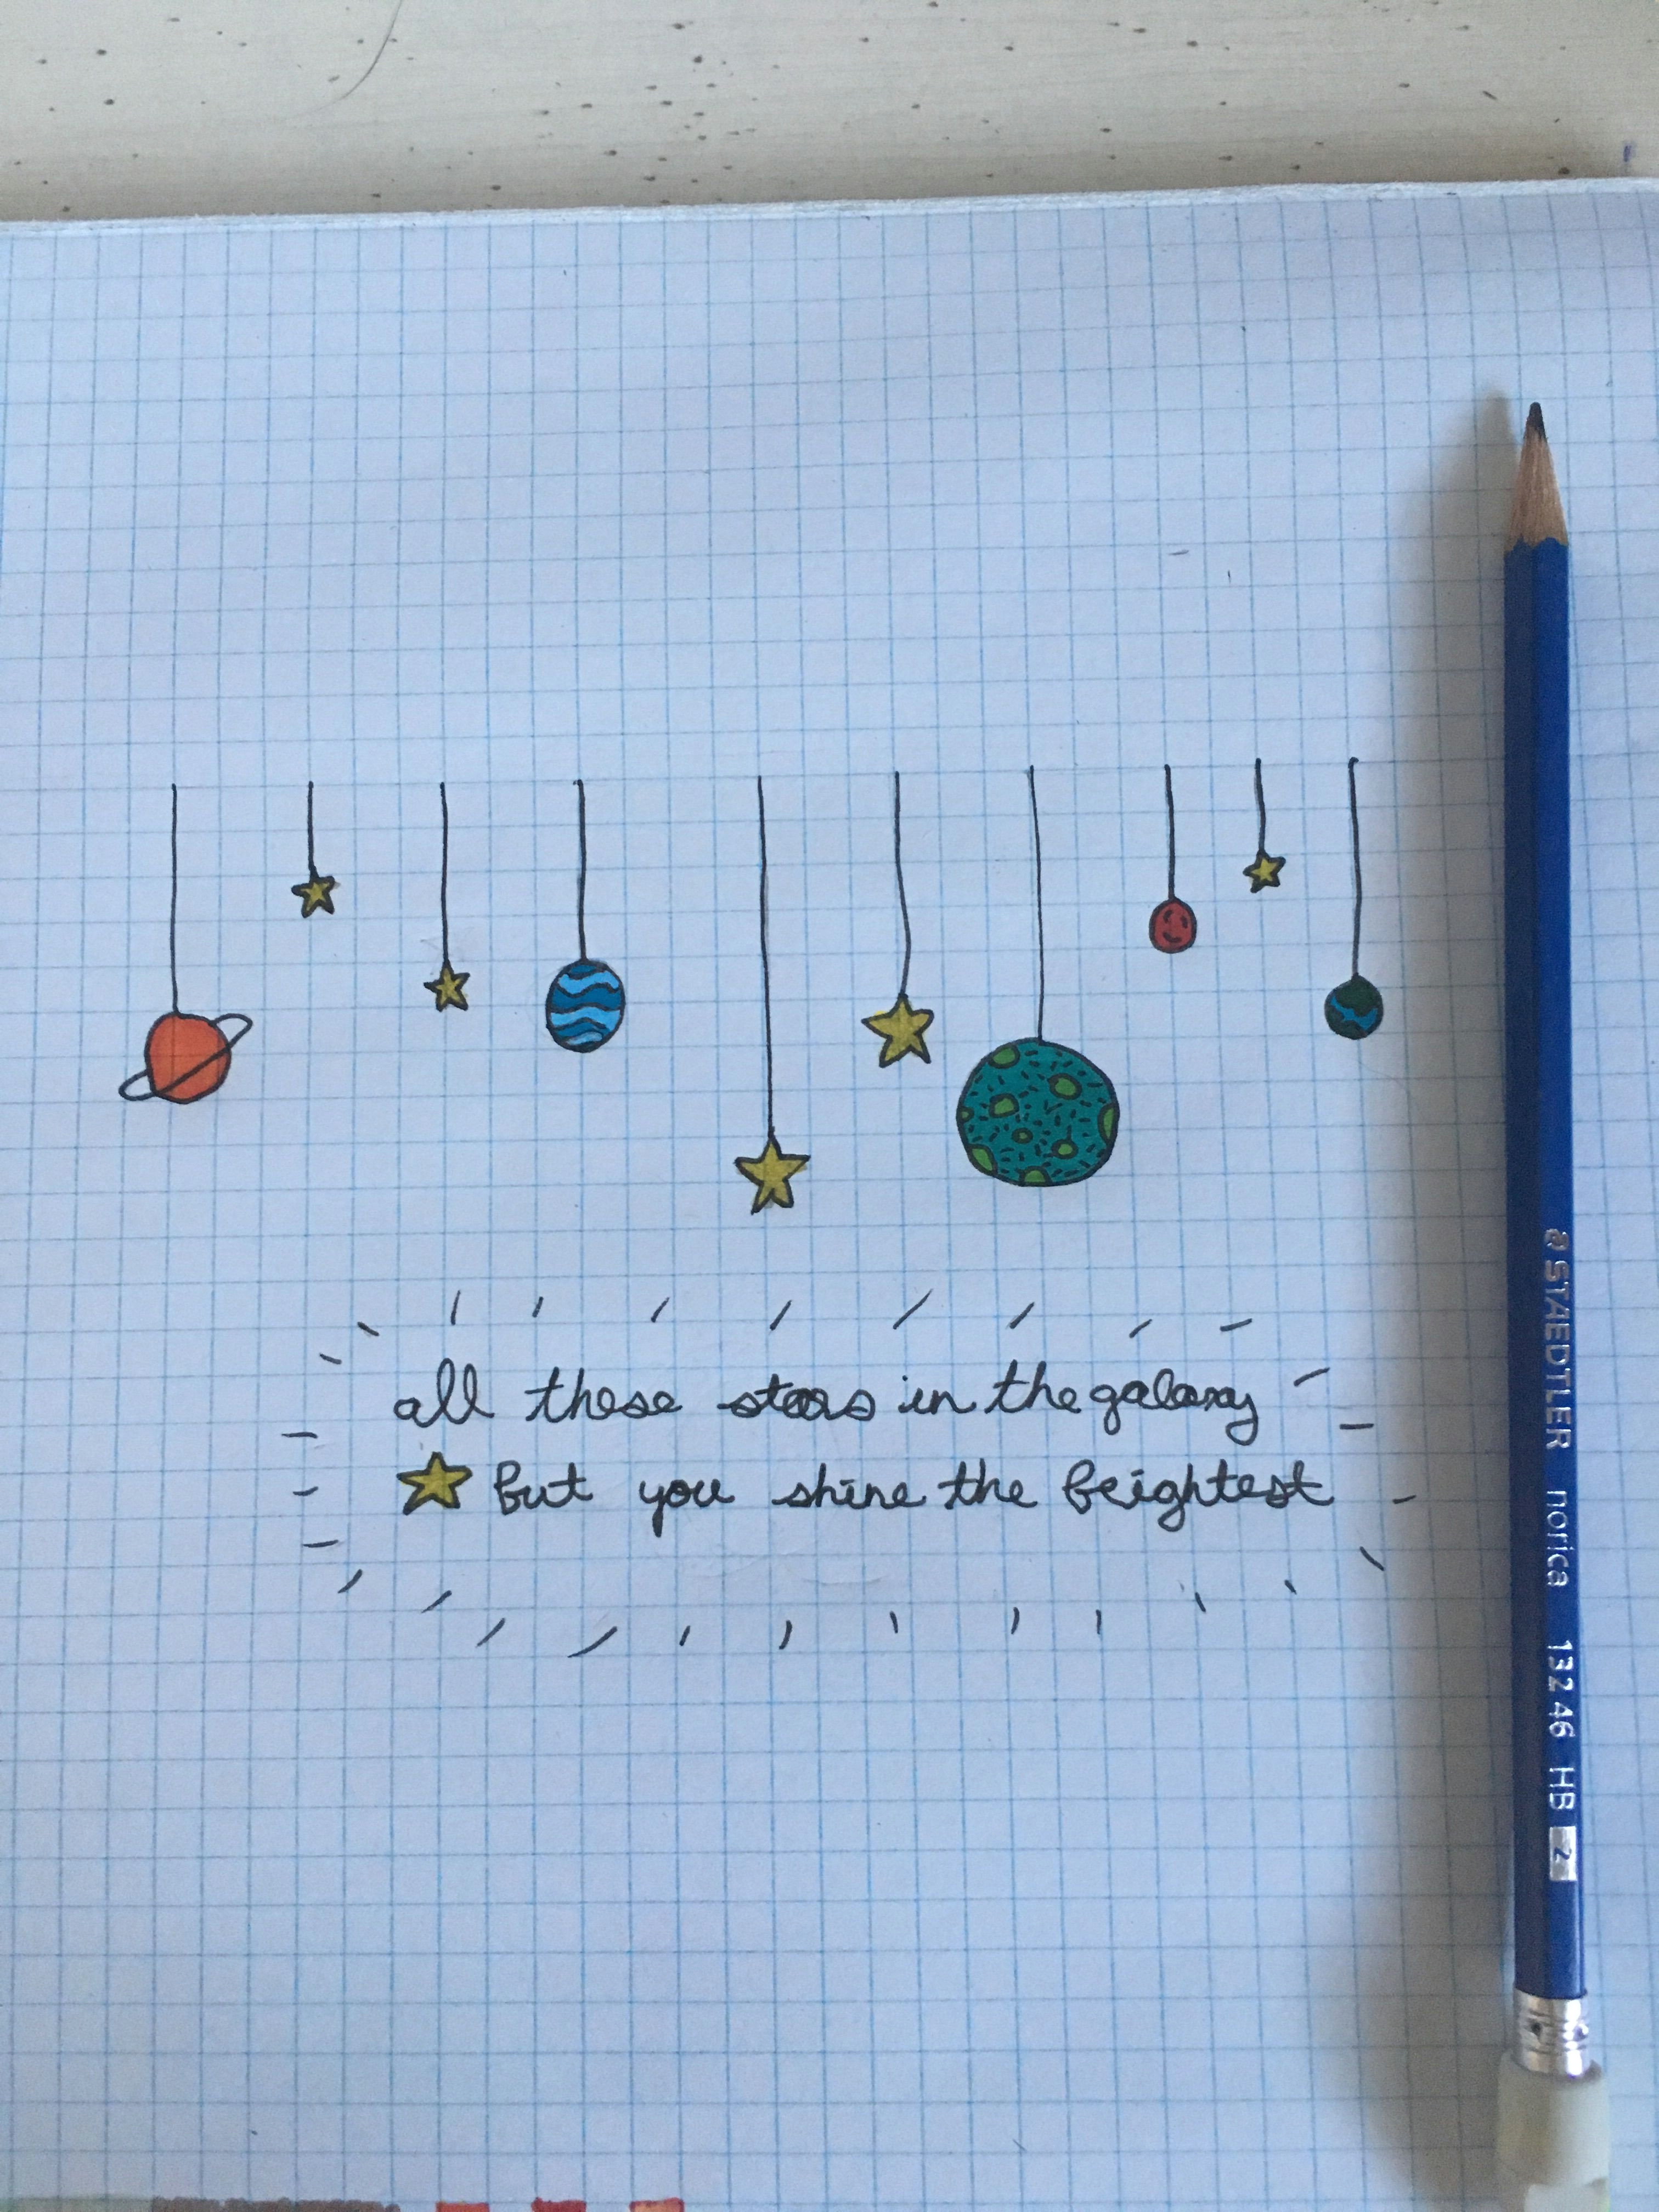 i drew some planet and decided to add some words at the bottom i really